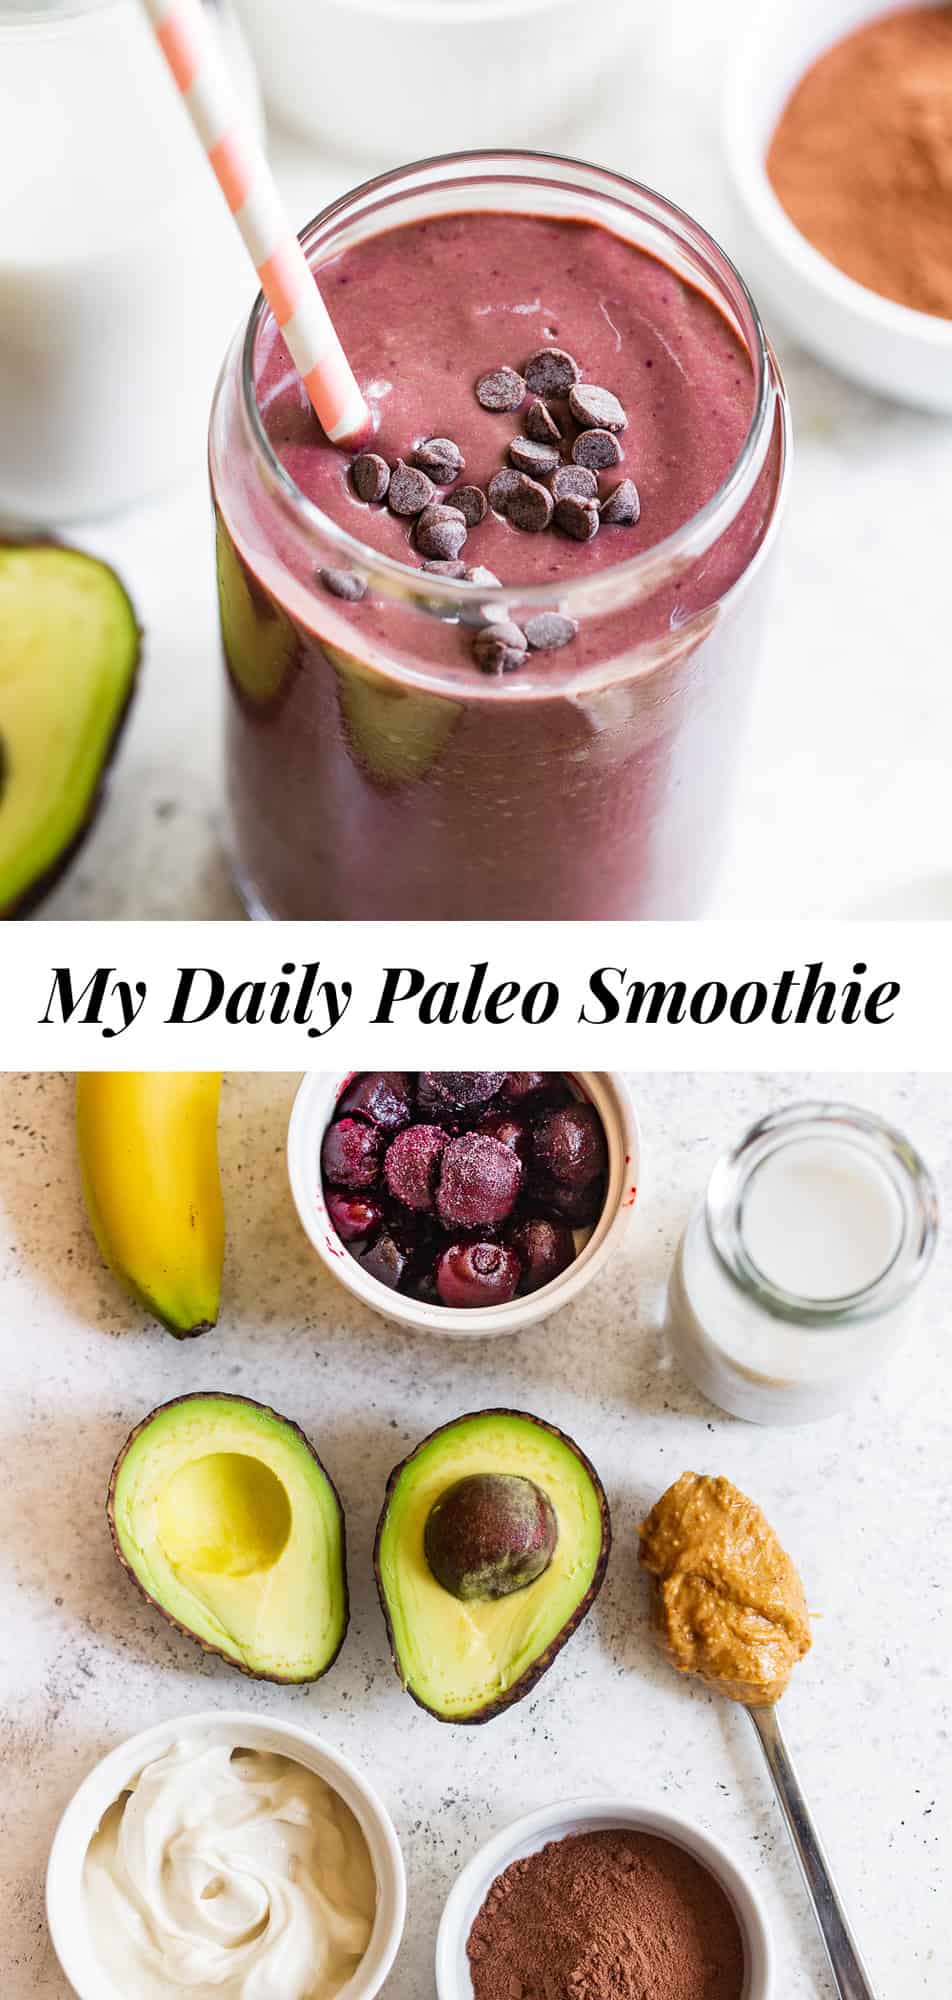 This simple paleo smoothie has become such a favorite that I make it every morning! Just the right amount of sweetness, with healthy fats, carbs, creamy texture and added protein. Enjoy it daily for breakfast or as an afternoon pick me up or even a dessert! #paleo #vegan #smoothie #cleaneating 